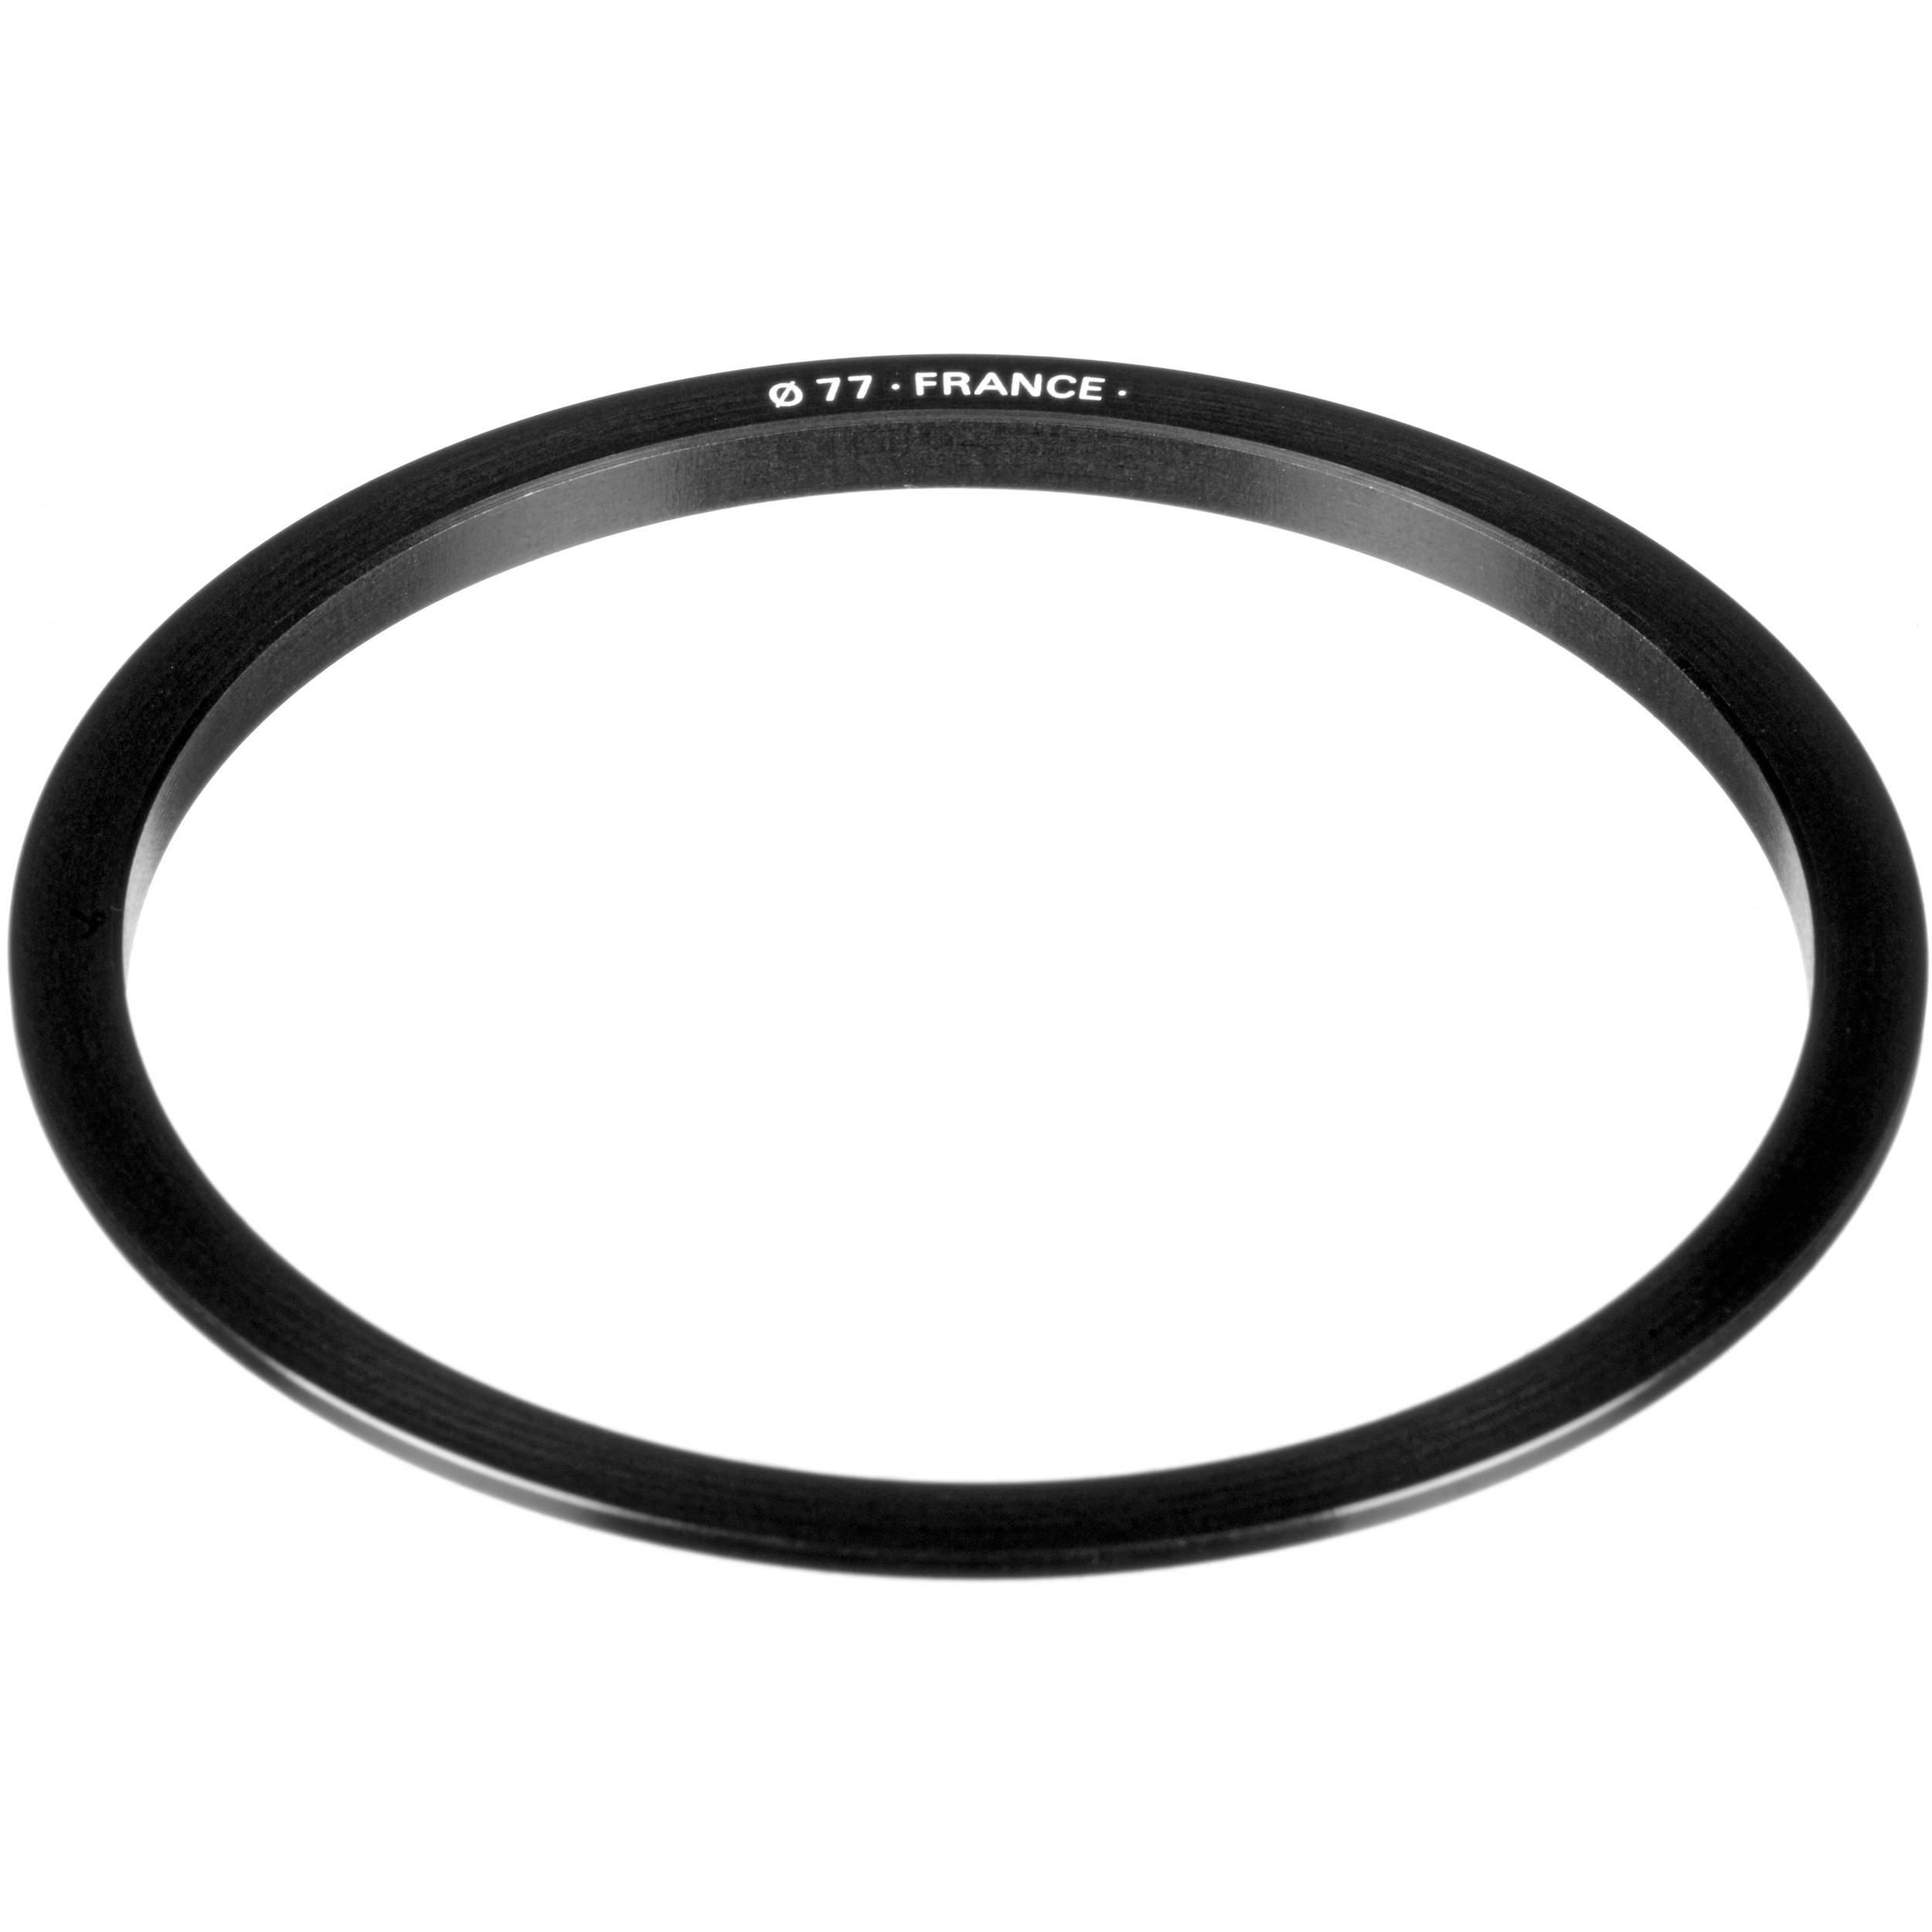 Cokin P Series Filter Holder Adapter Ring 77mm Cp477 B H Photo Cokin filter holder p with 67mm adpater ring & 28 page instruction book for p series mfr: cokin p series filter holder adapter ring 77mm